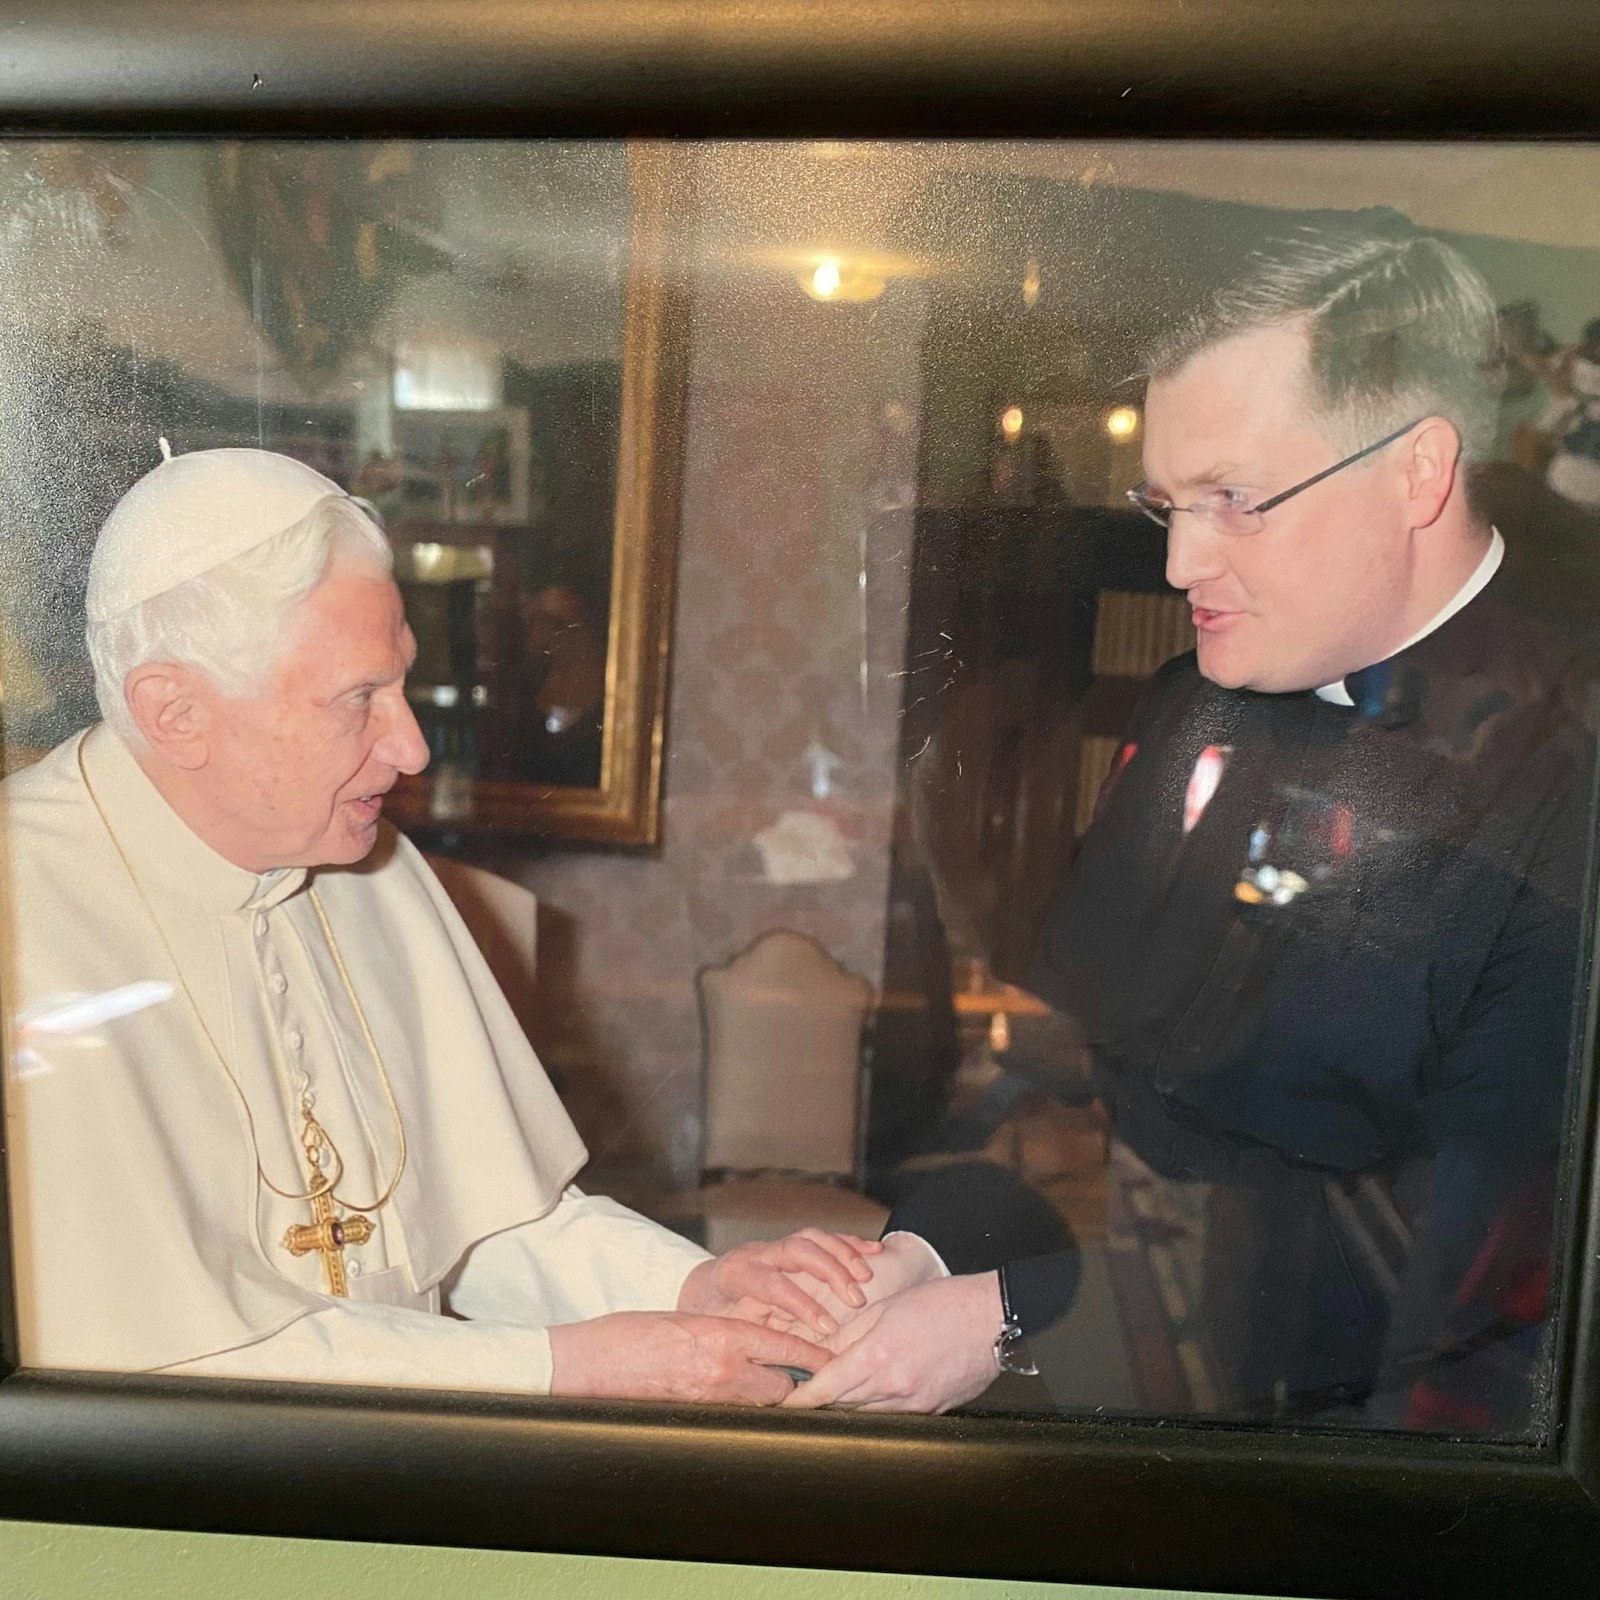 Fr. Charles Fox met the late Pope Benedict XVI during an ad limina visit alongside Archbishop Allen H. Vigneron in 2012. (Courtesy of Fr. Charles Fox)